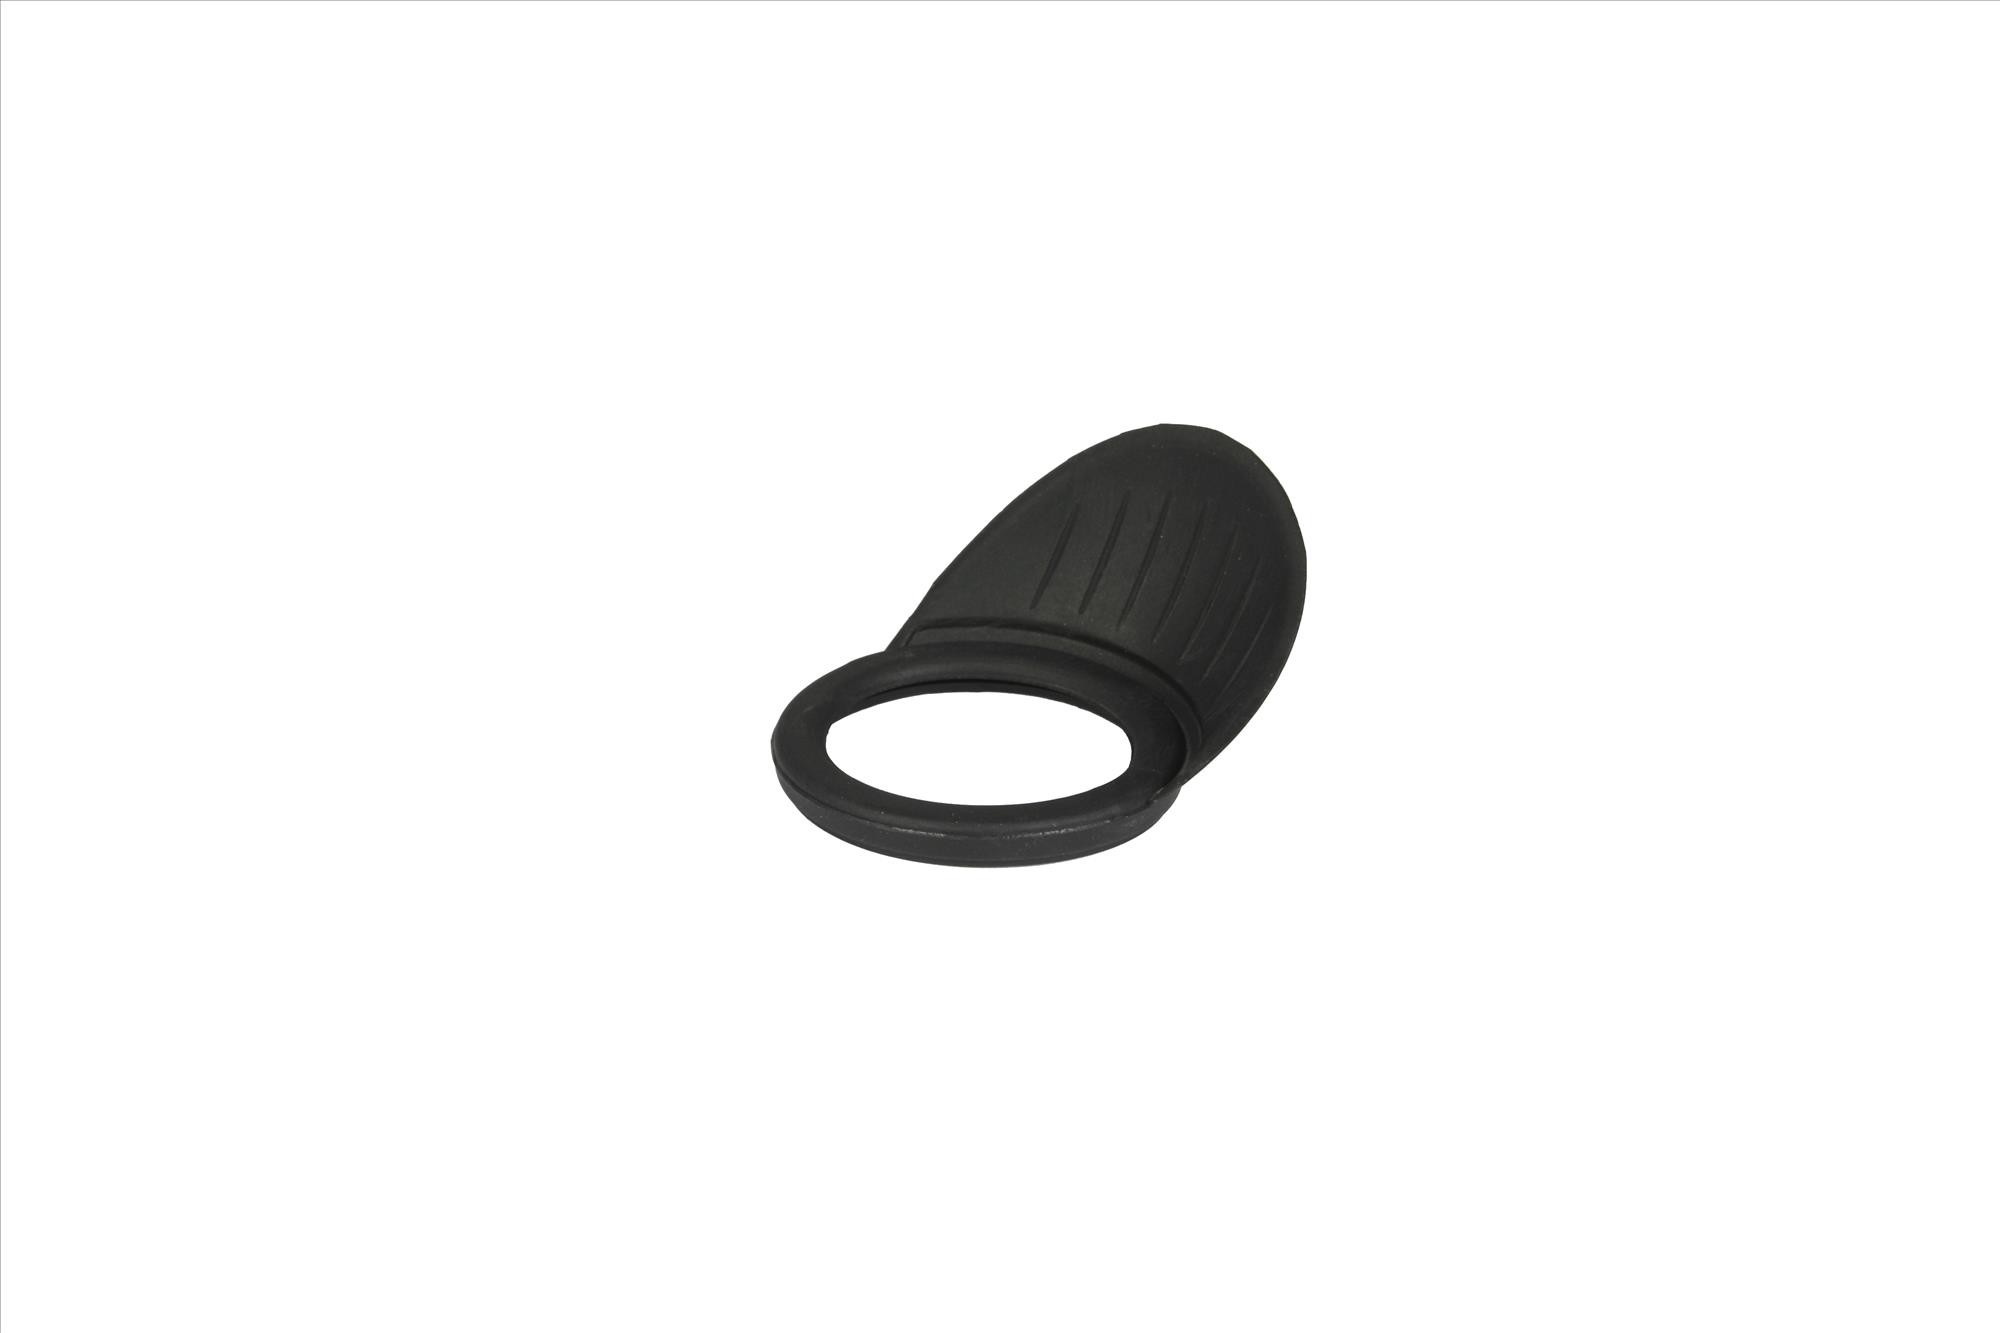 Baader winged rubber-eyecup 43/44 (for all Hyperion Zoom eyepieces)